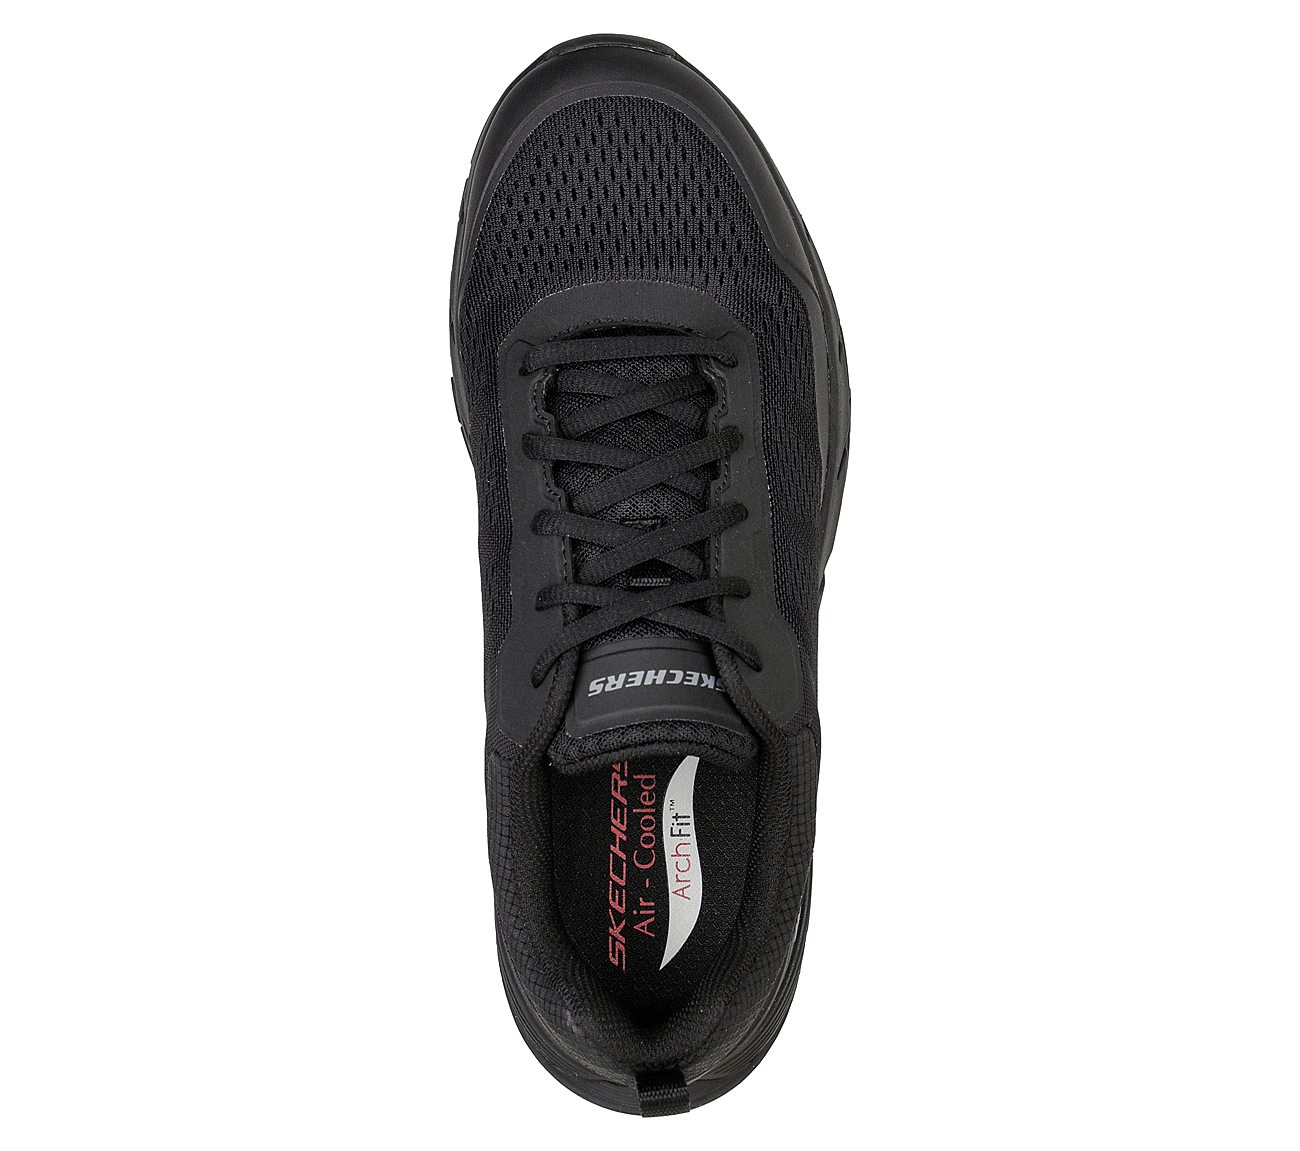 ARCH FIT BAXTER - PENDROY, BBLACK Footwear Top View